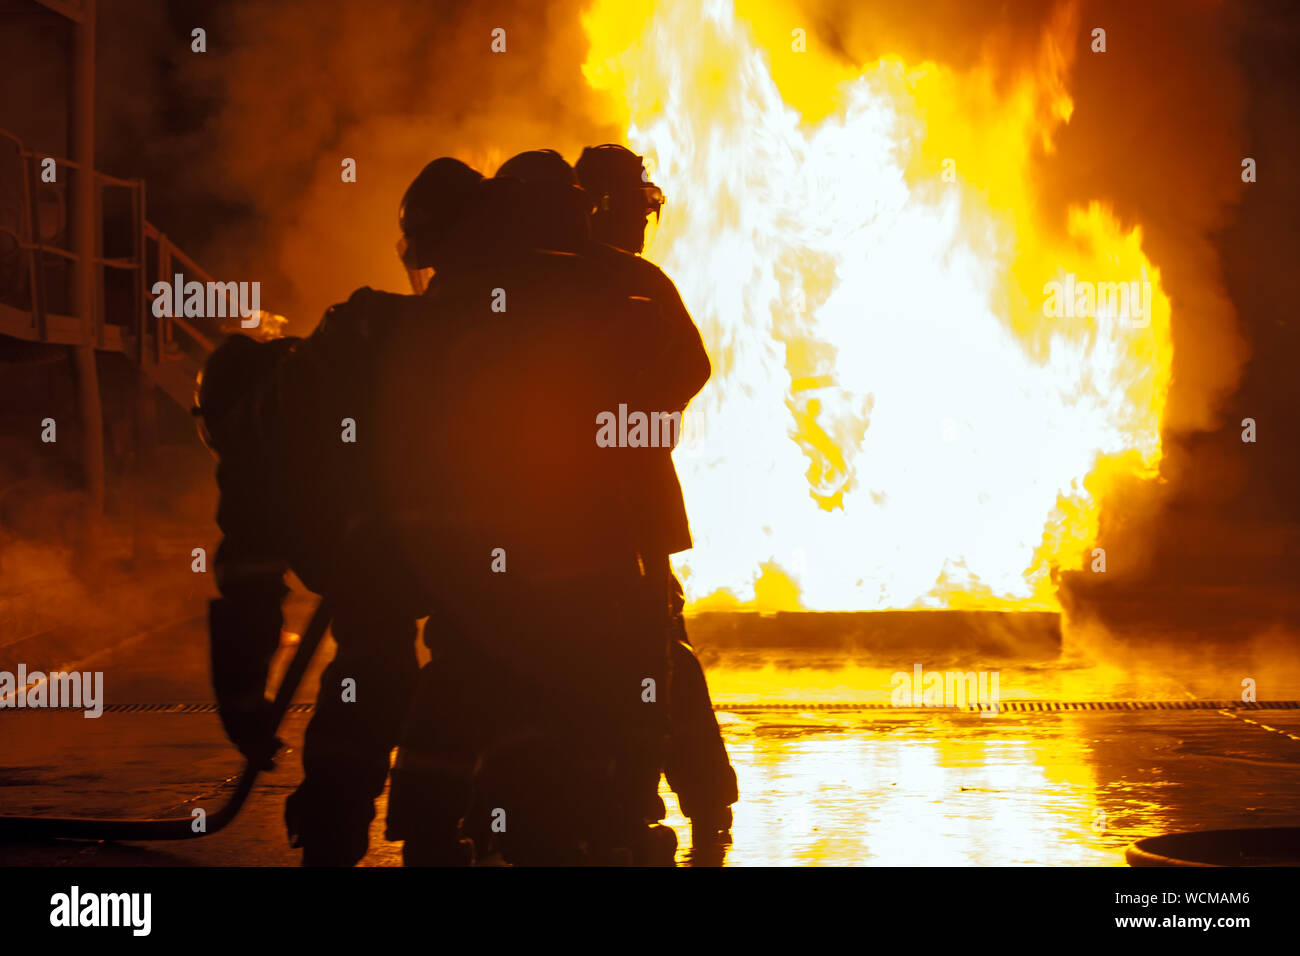 Rescue Workers Dousing Fire At Night Stock Photo